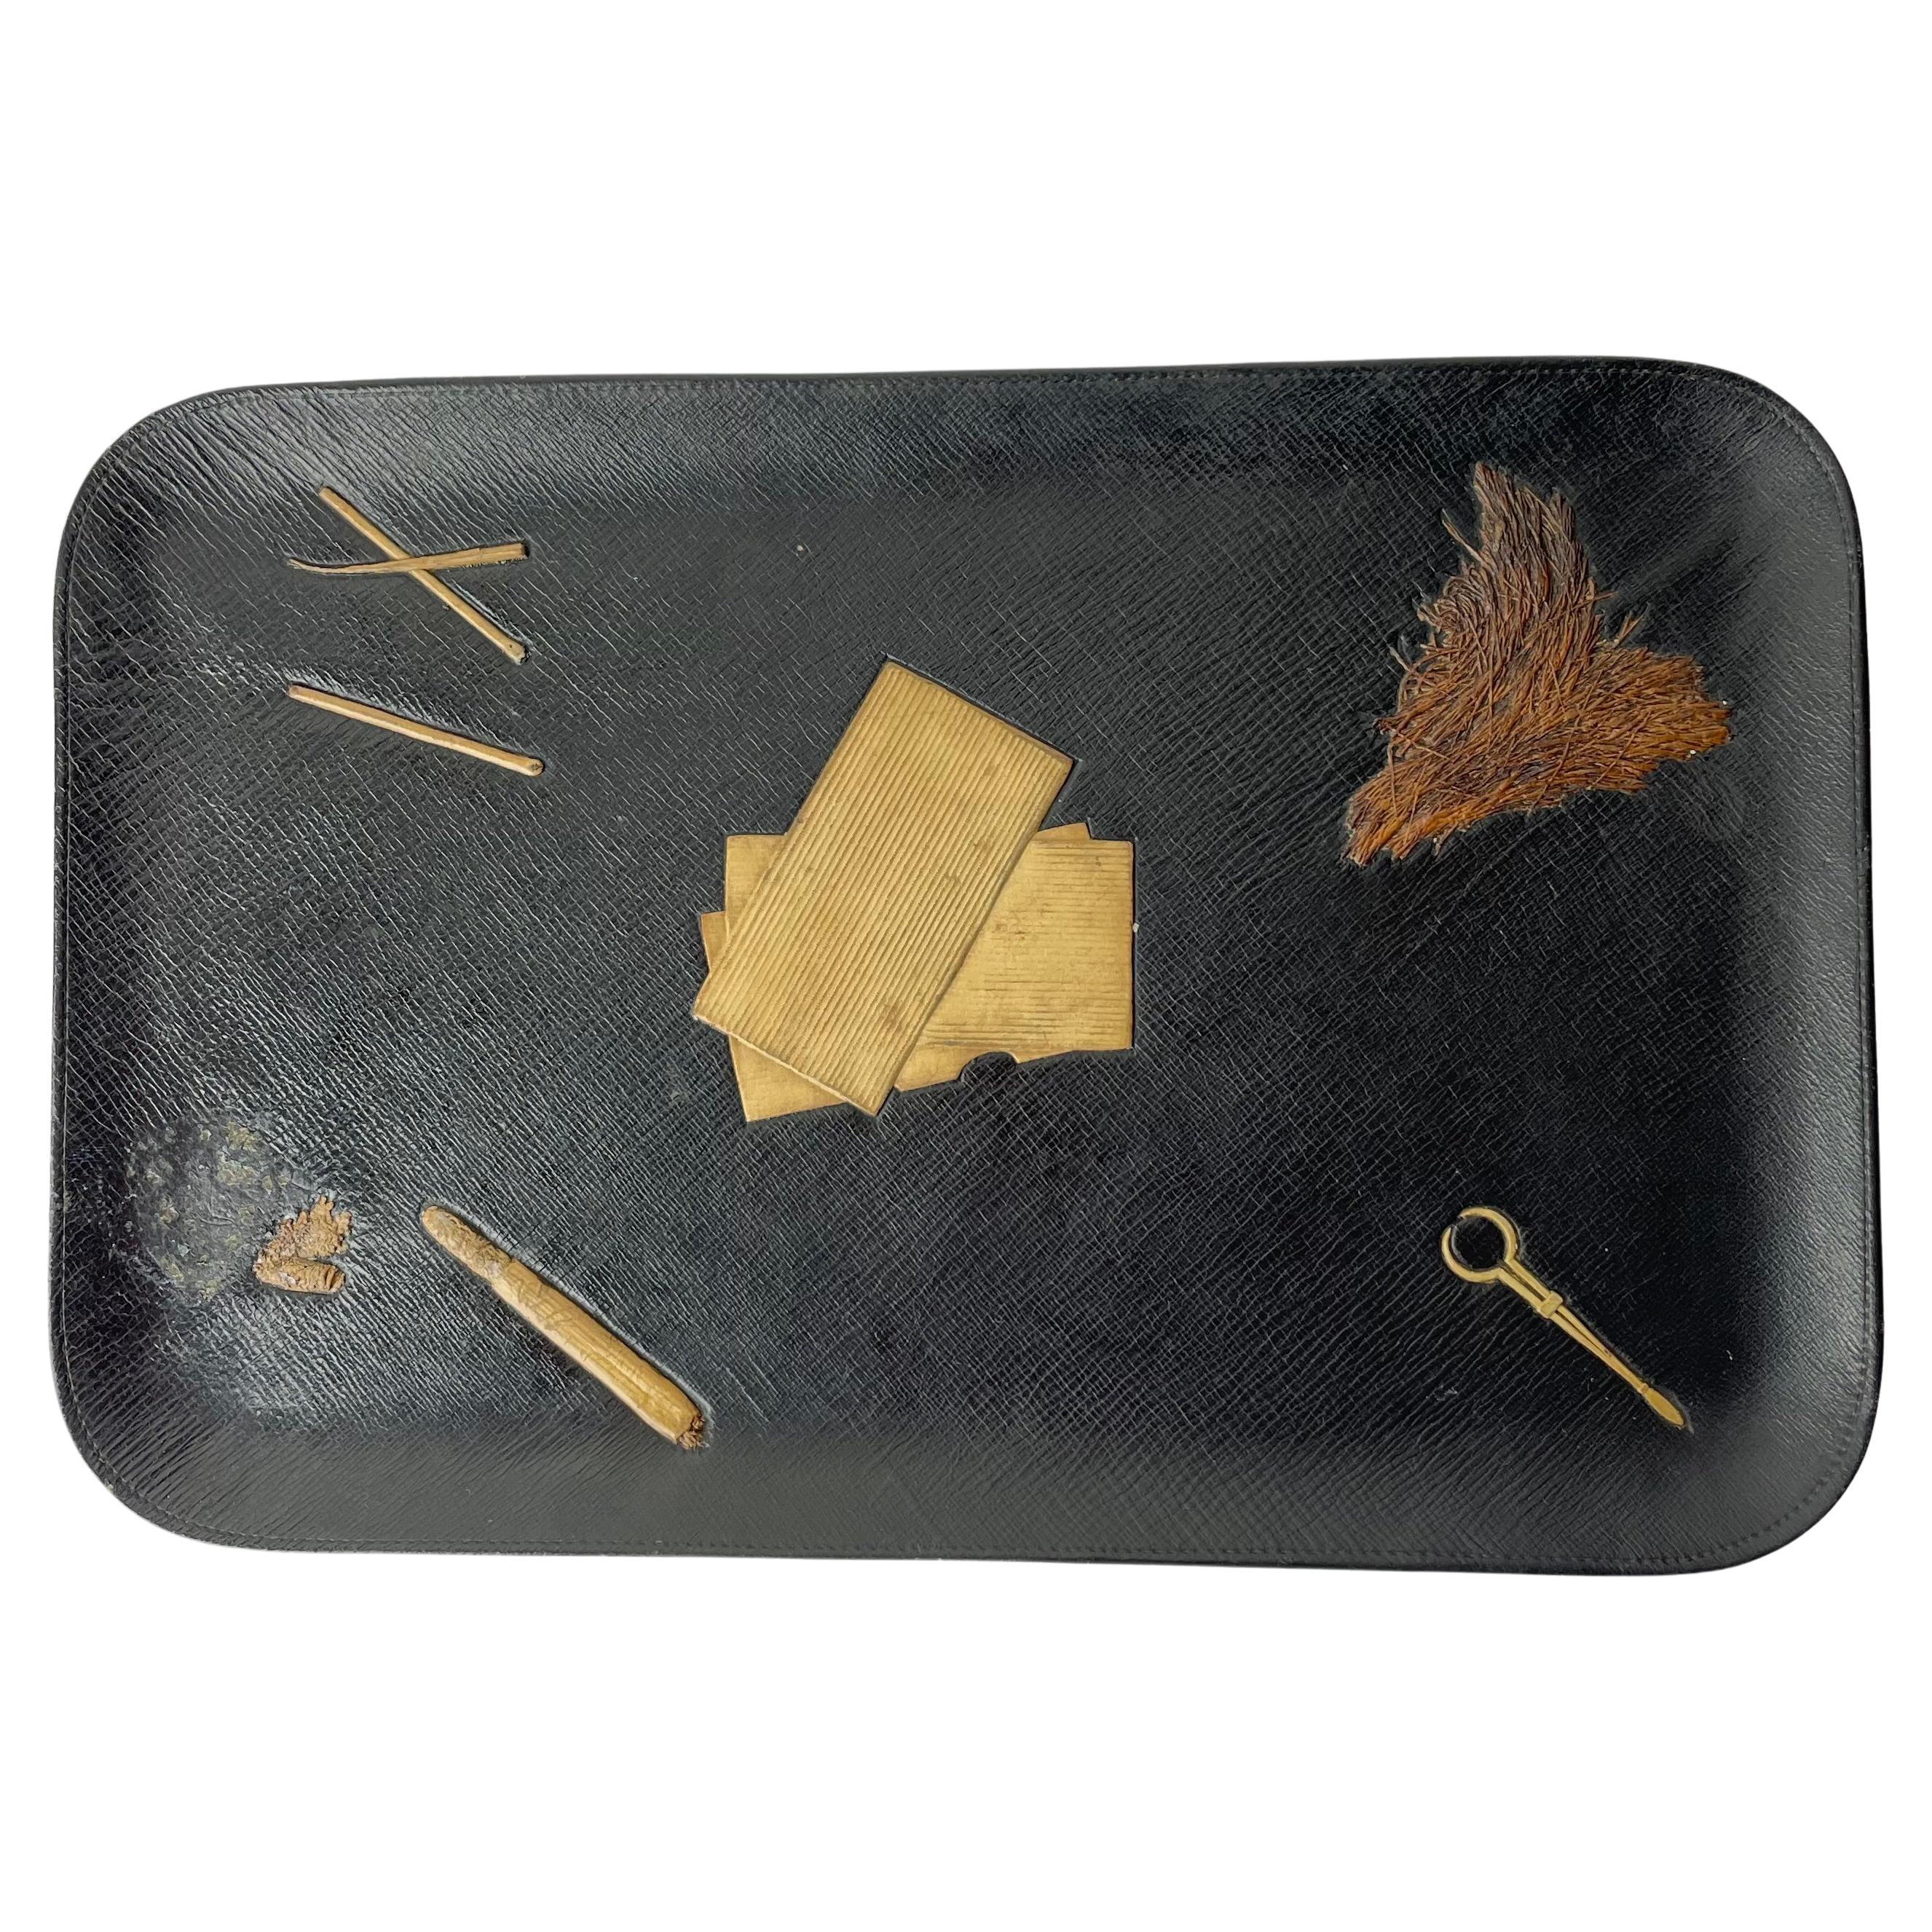 Leather-covered Desk Dish with Smoking Accessories from the early 20th Century For Sale